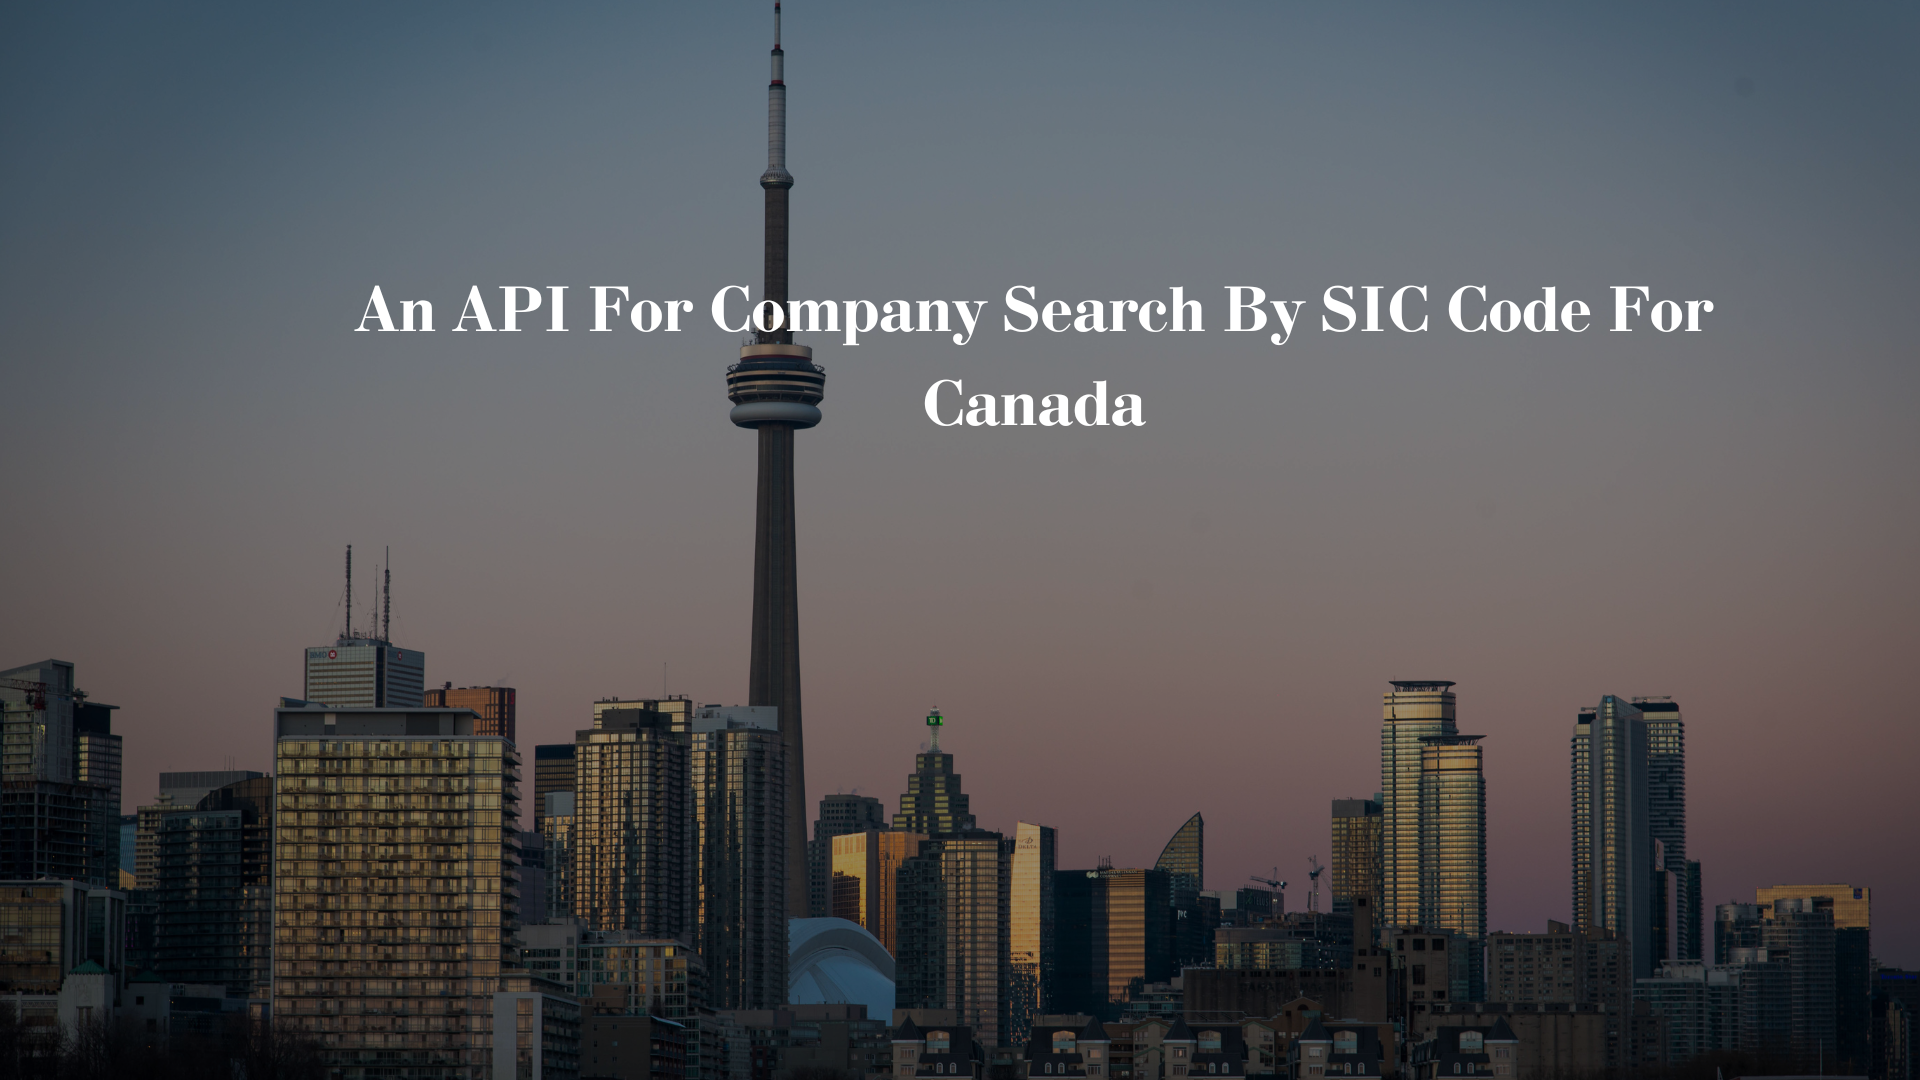 An API For Company Search By SIC Code For Canada